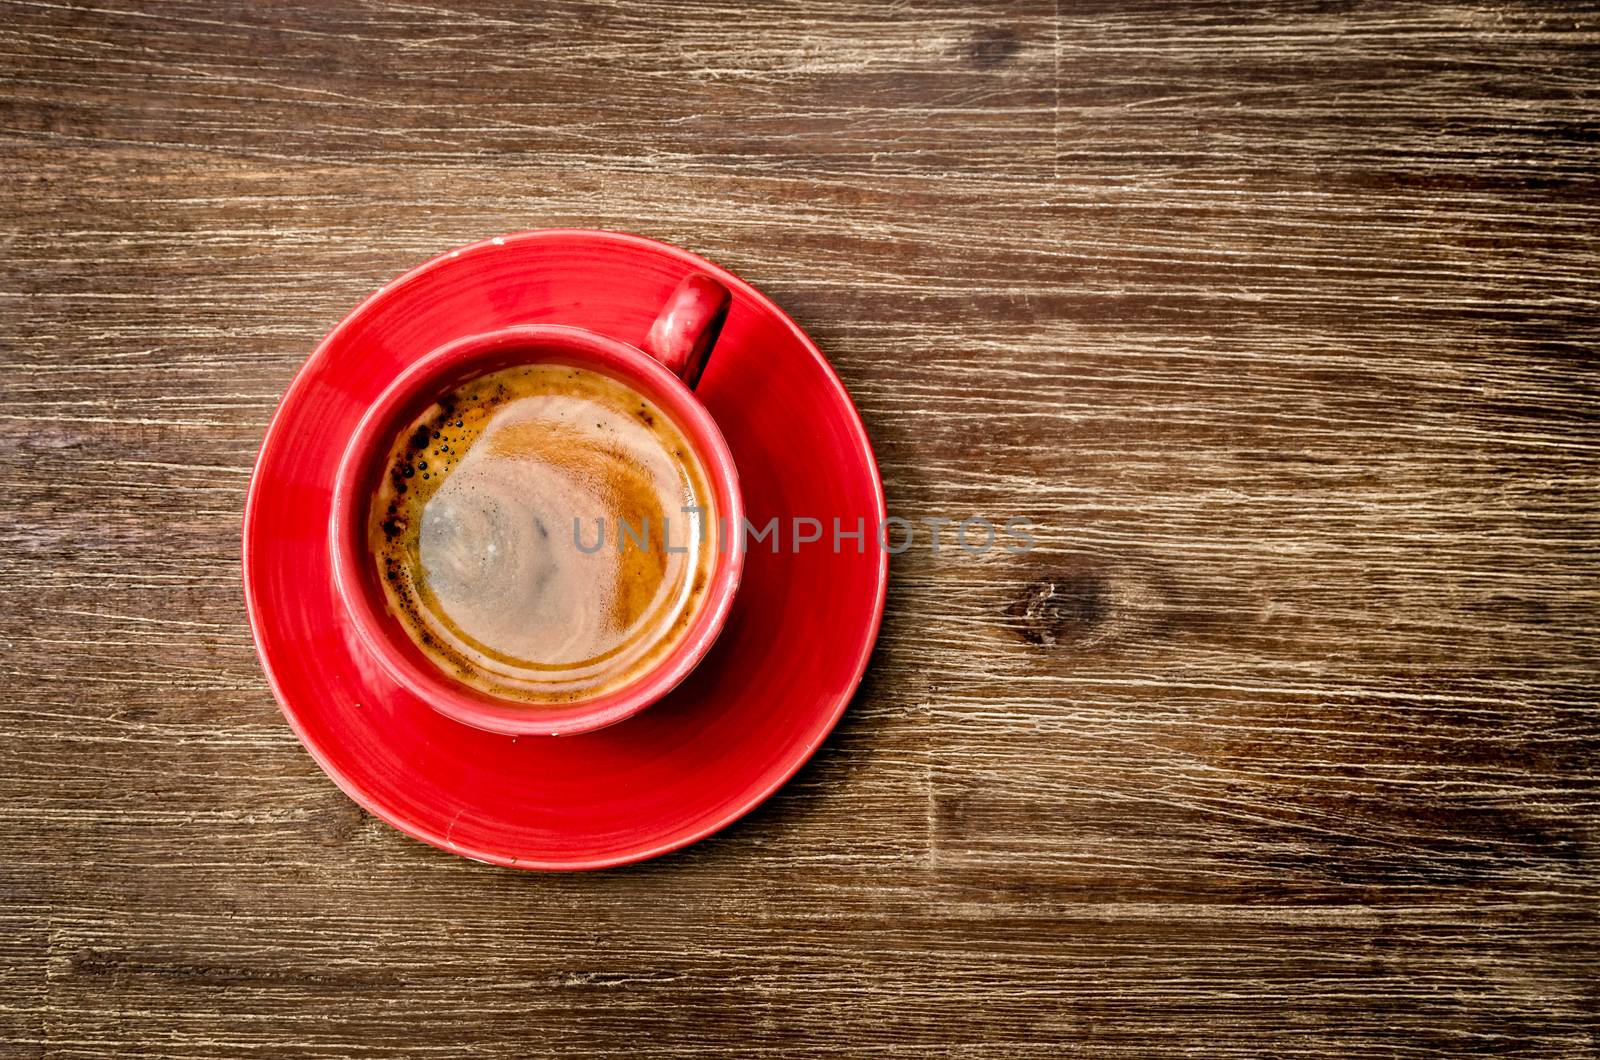 Top view of coffee in red cup on wooden vintage table